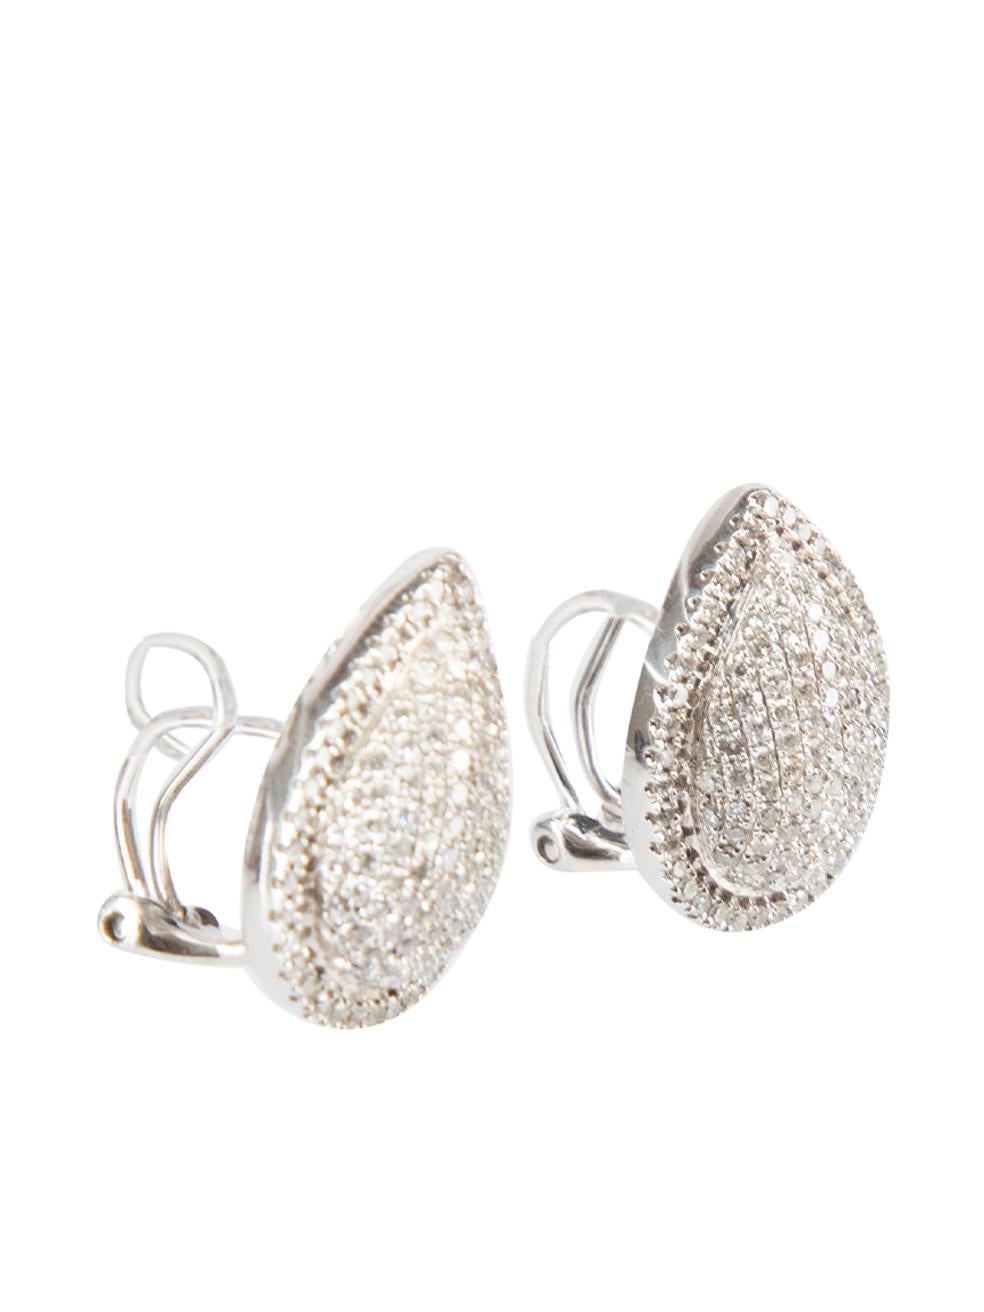 CONDITION is Very good. Hardly any visible wear to earrings is evident on these used designer resale items. This item comes with original box.
 
 Details
  Silver
 14ct White Gold Diamond
 Earrings
 Pear shaped
 
 
 Made in Italy
 
 Composition
